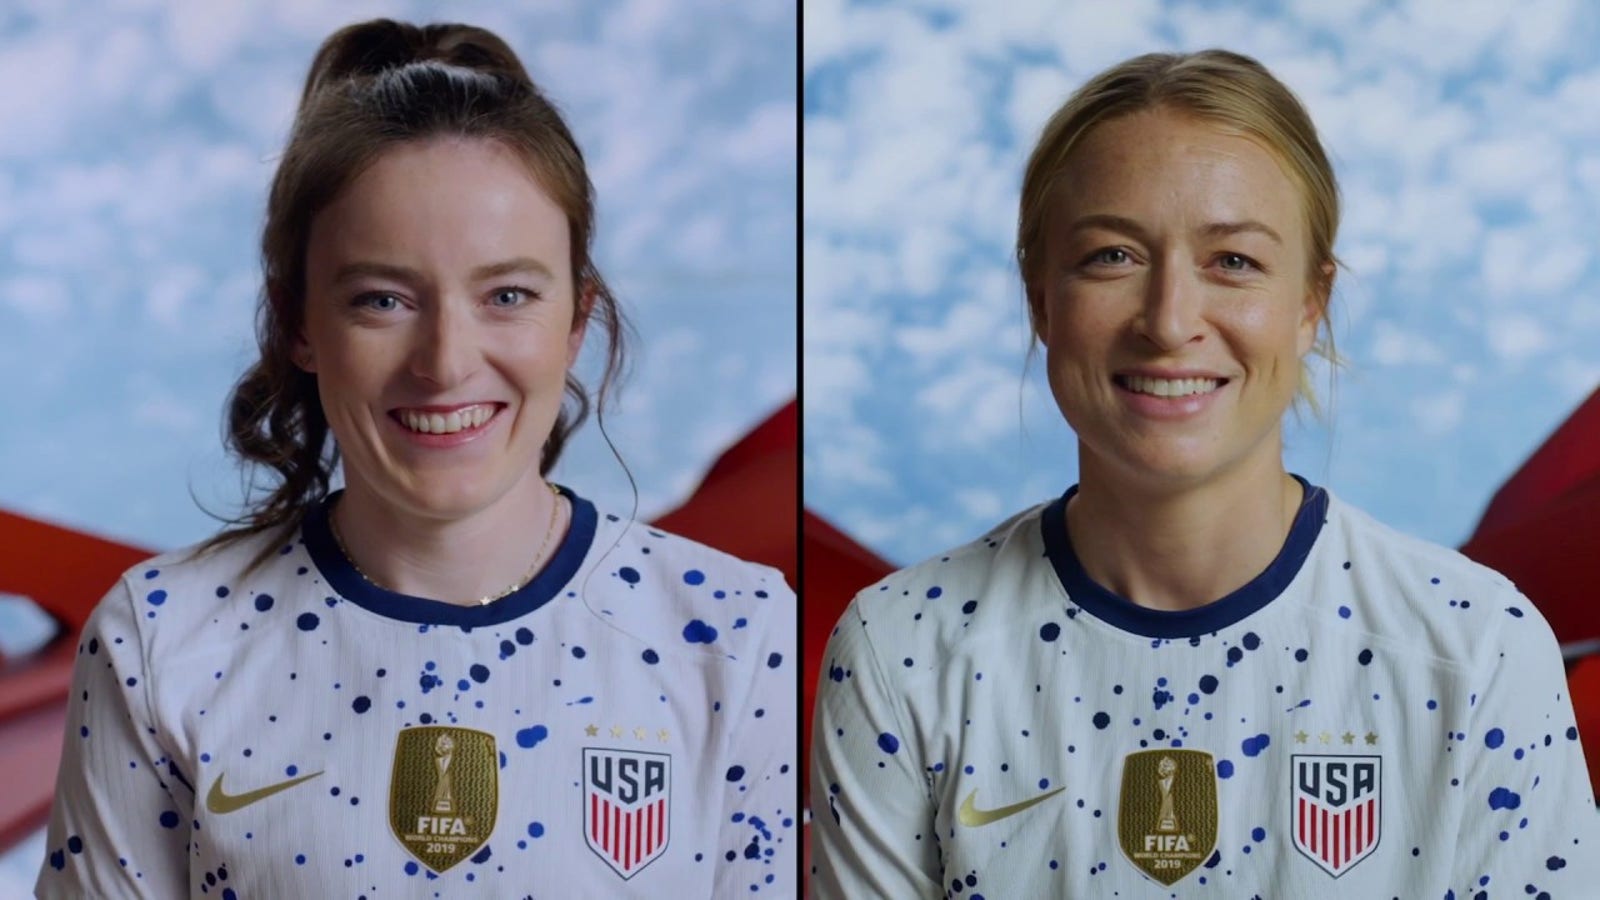 Get to know the personalities of the USWNT